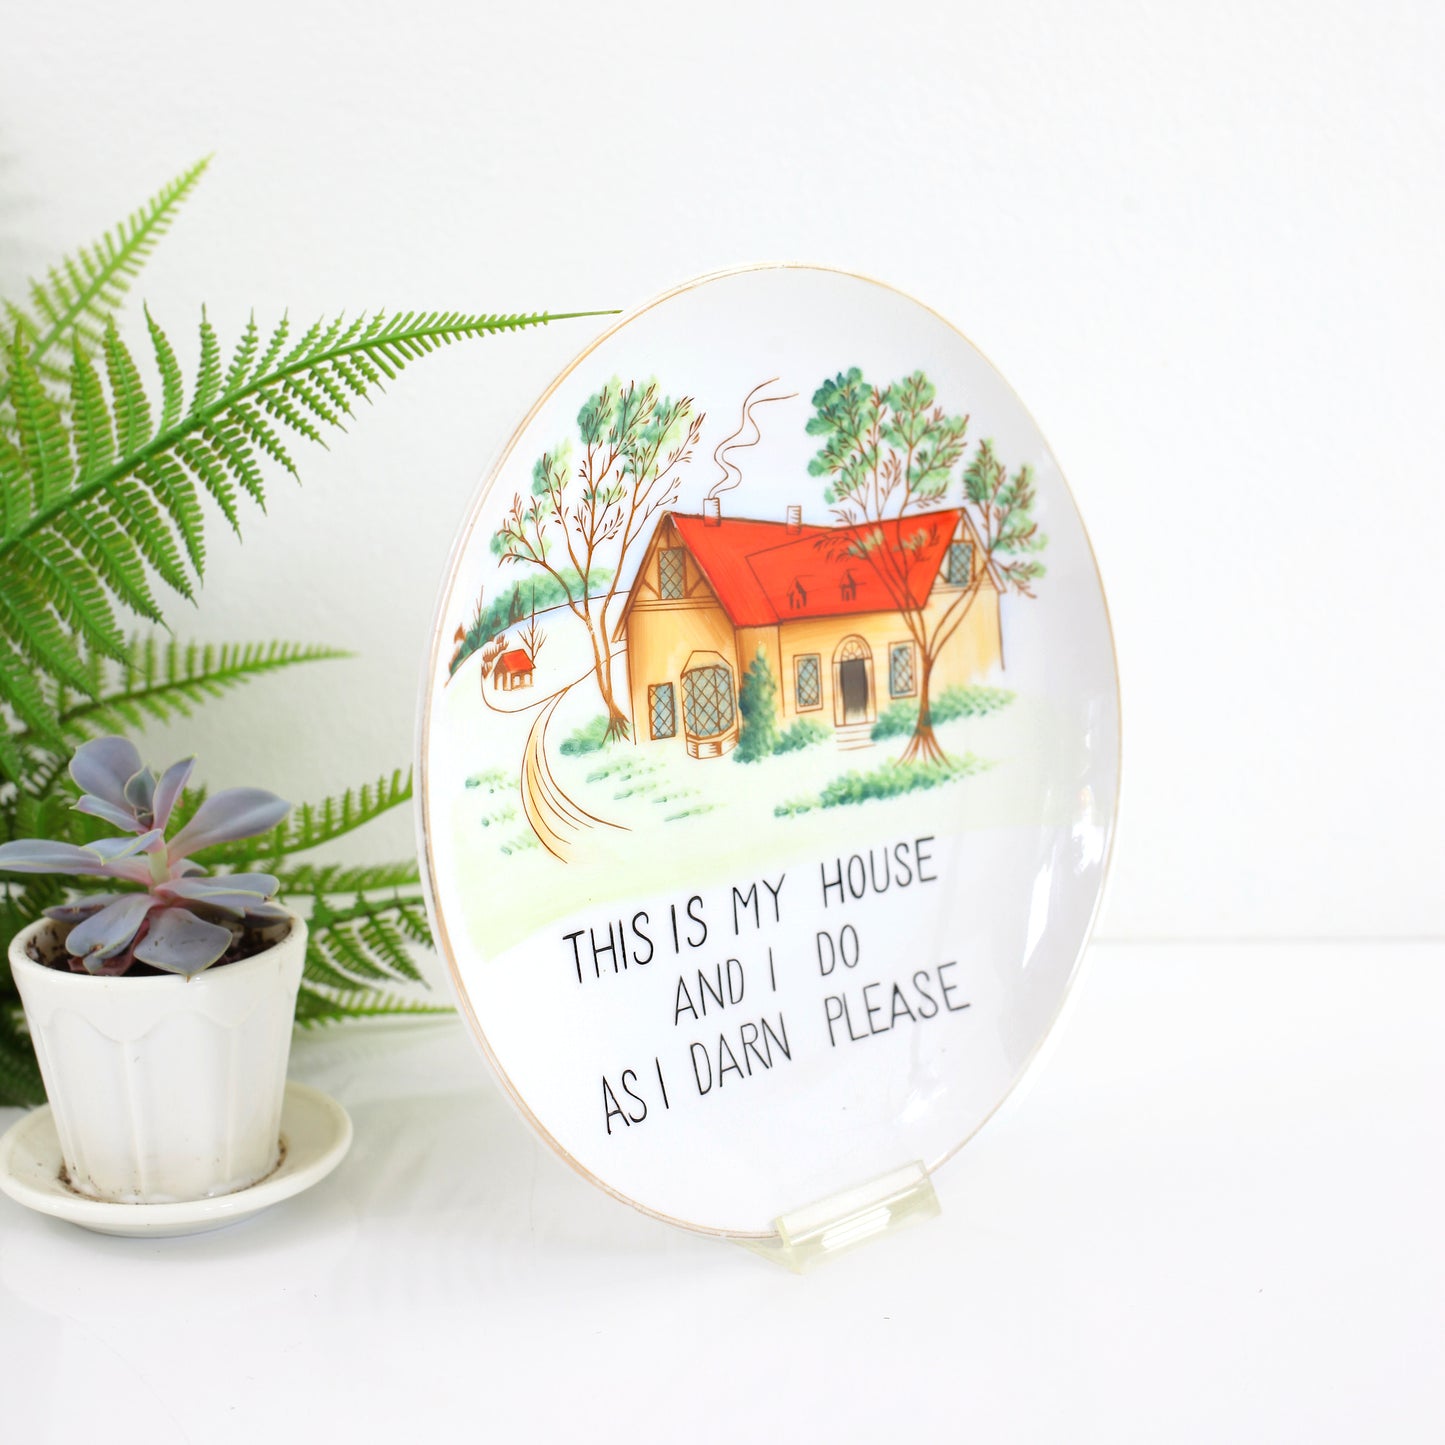 SOLD - Kitschy Vintage Wall Plate - This Is My House And I'll Do As I Darn Please